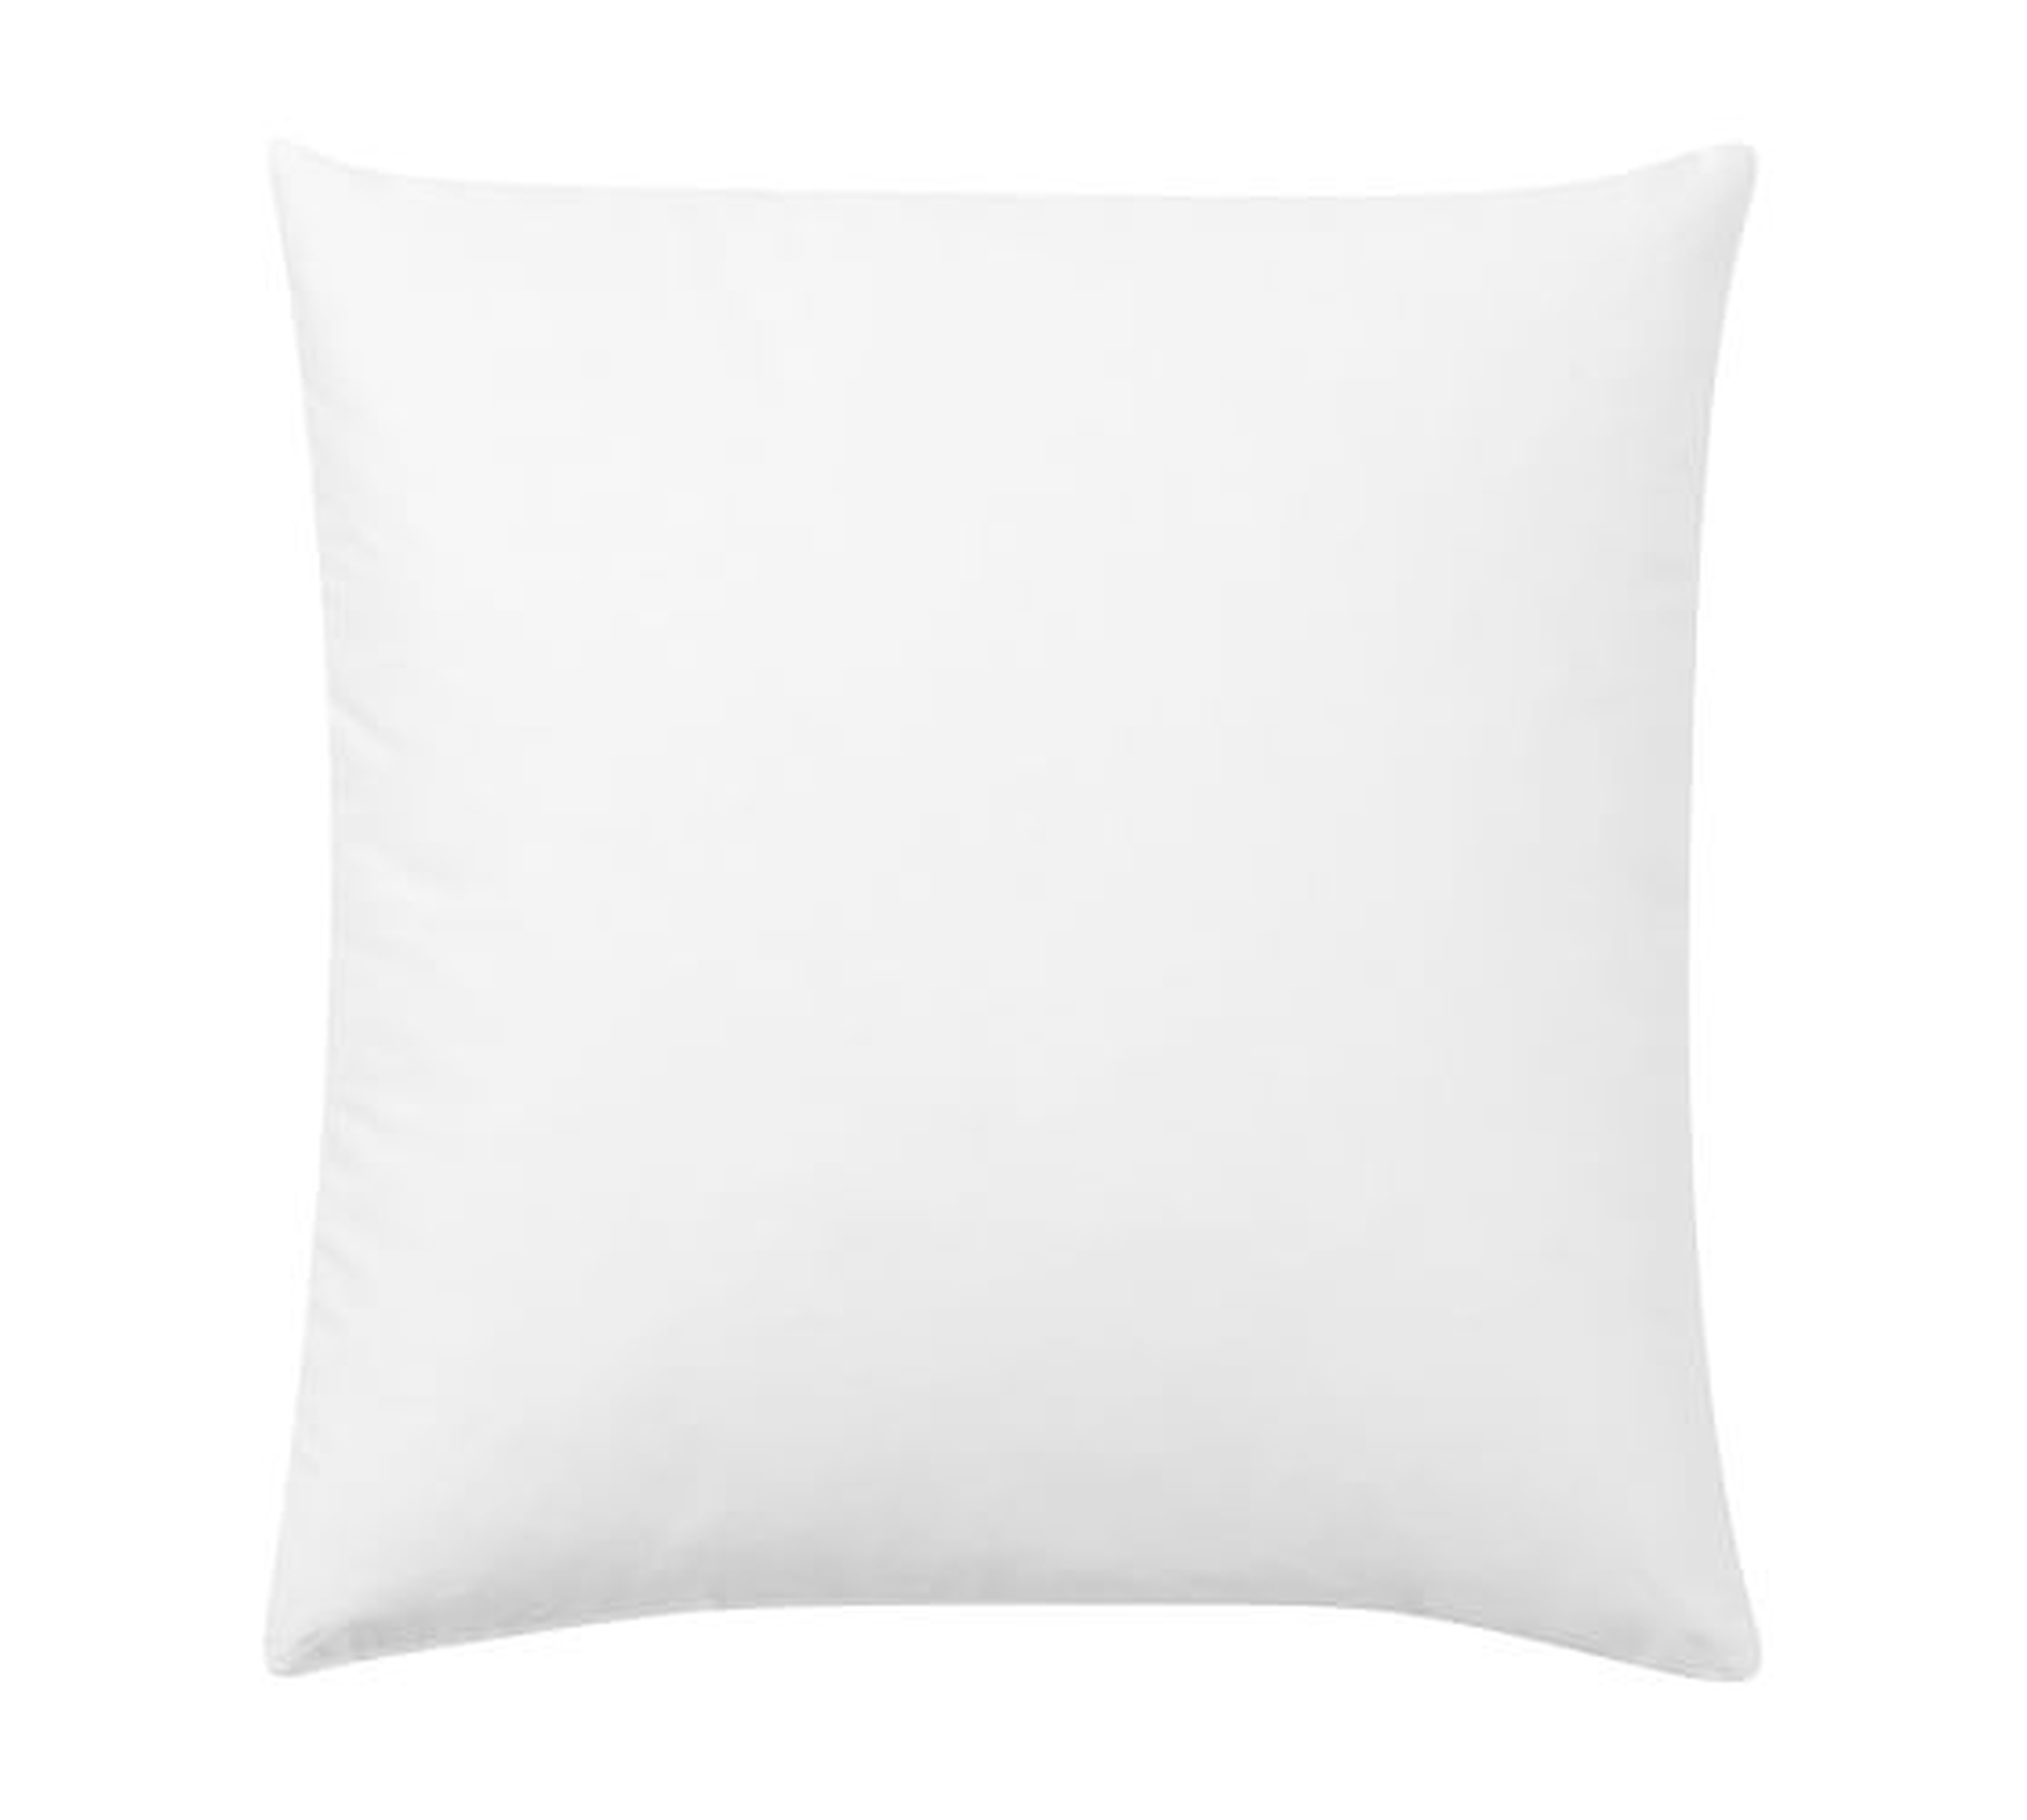 Pillow Insert - 18" x 18" - Feather - Pottery Barn